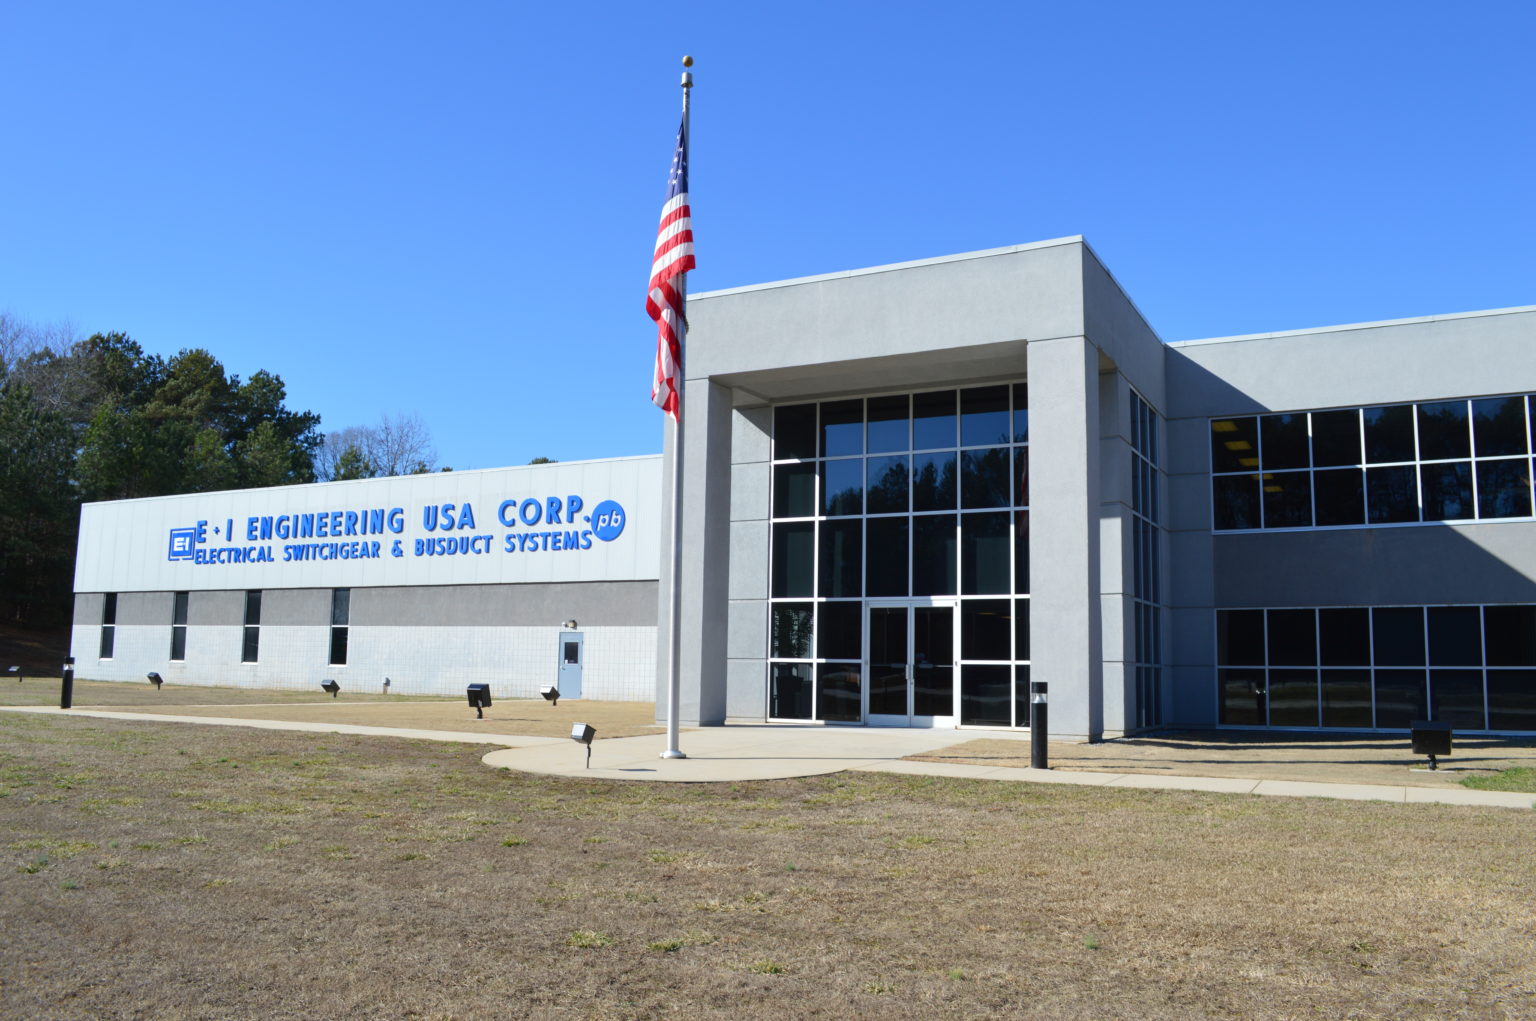 E+I Engineering USA Corp. has already broken ground on a new data power distribution center set for completion in the third quarter of this year. (Photo/Provided)